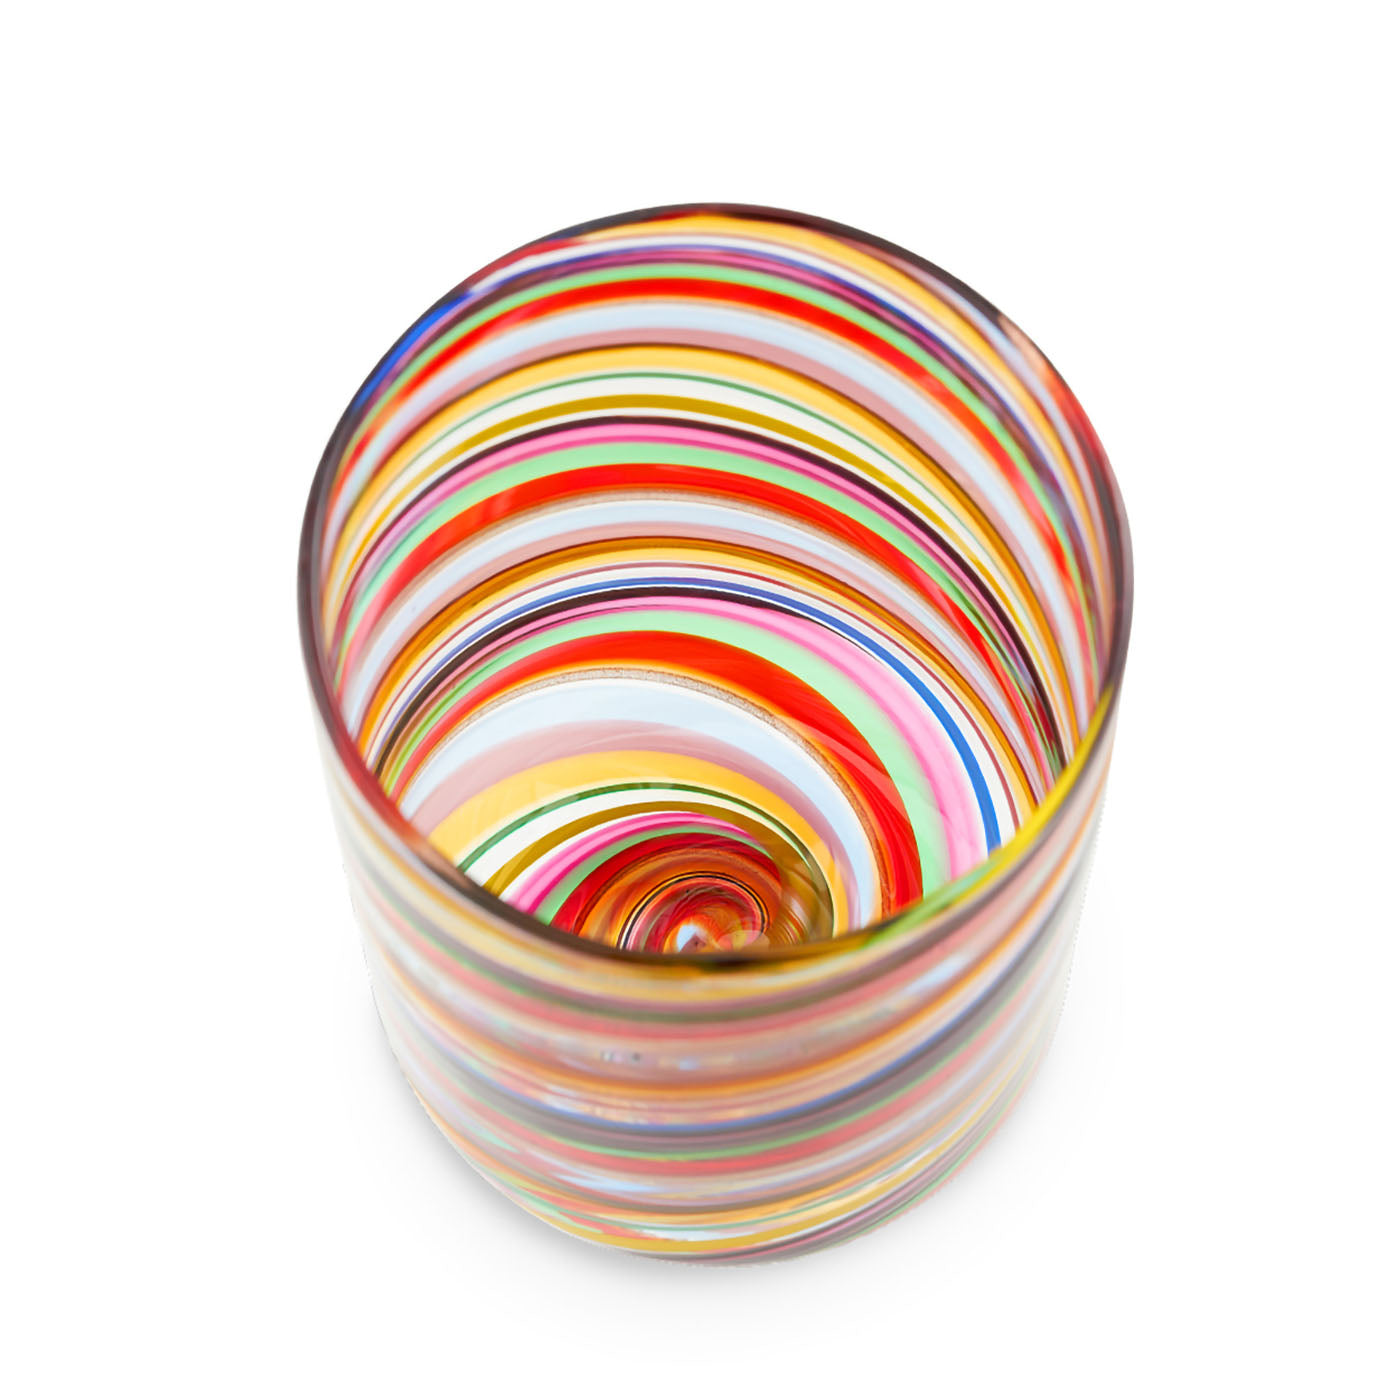 Rainbow Swirl Set of 2 Mouth-Blown Multicolor Water Tumblers  - Alternative view 1